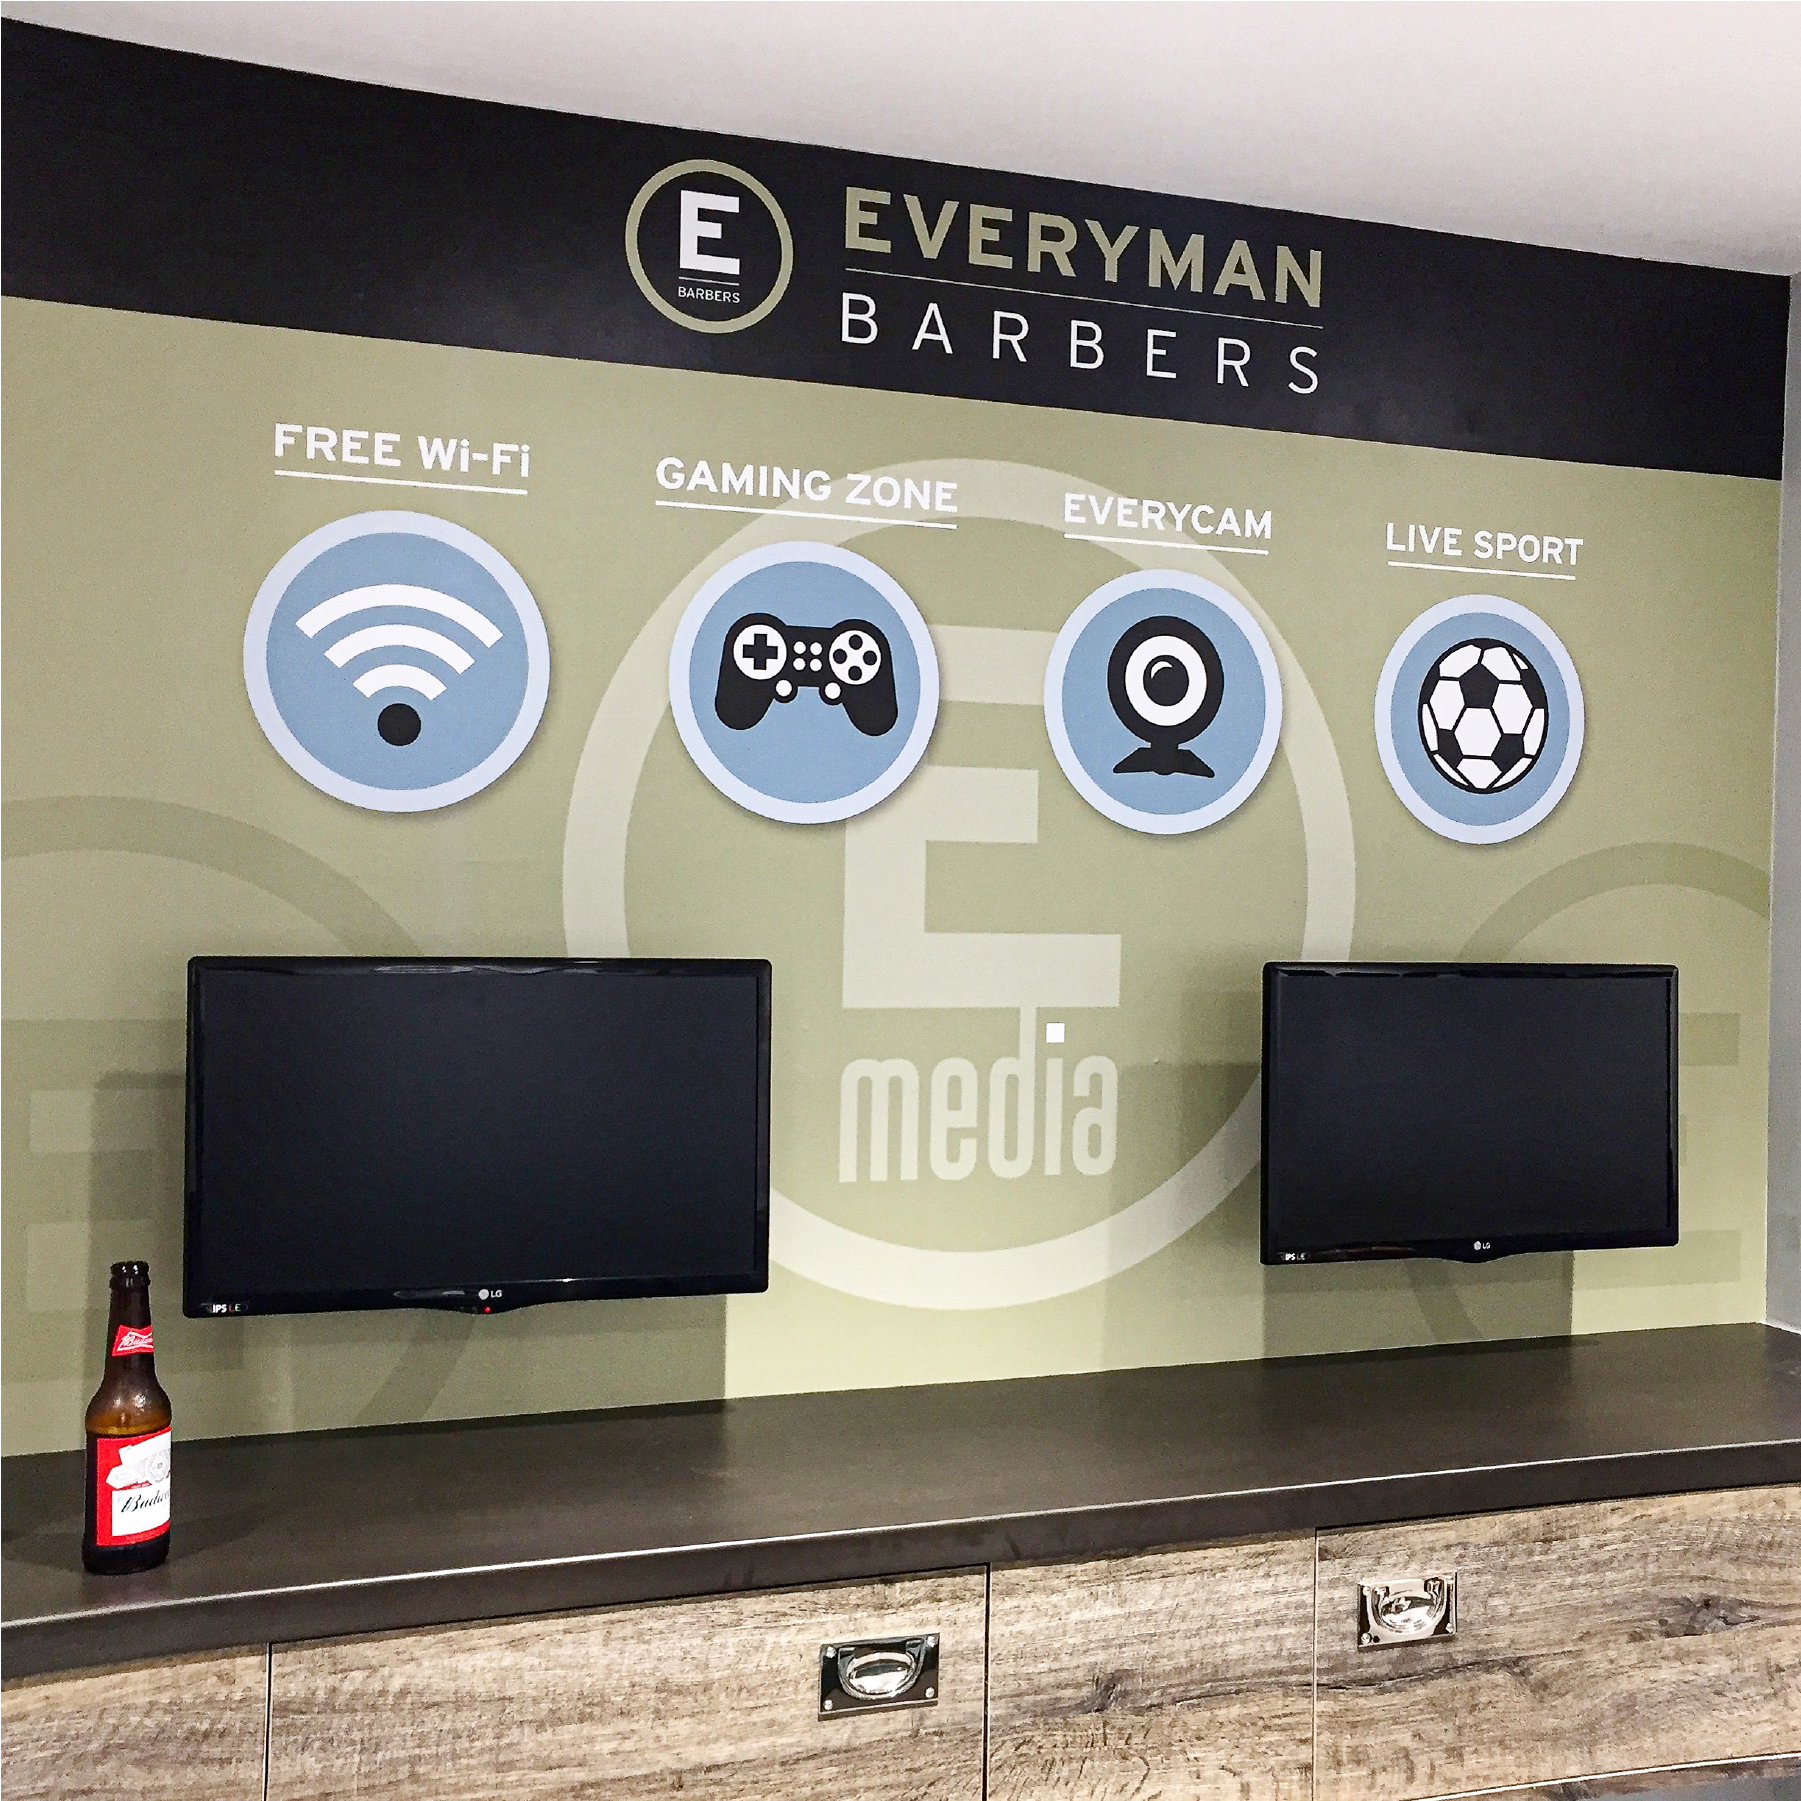 A Wall covering displaying Everyman Barbers Logo with a sage green background and symbols displaying free wifi, gaming zone, everycam and live sport. There are two monitors on the wall below the icons.